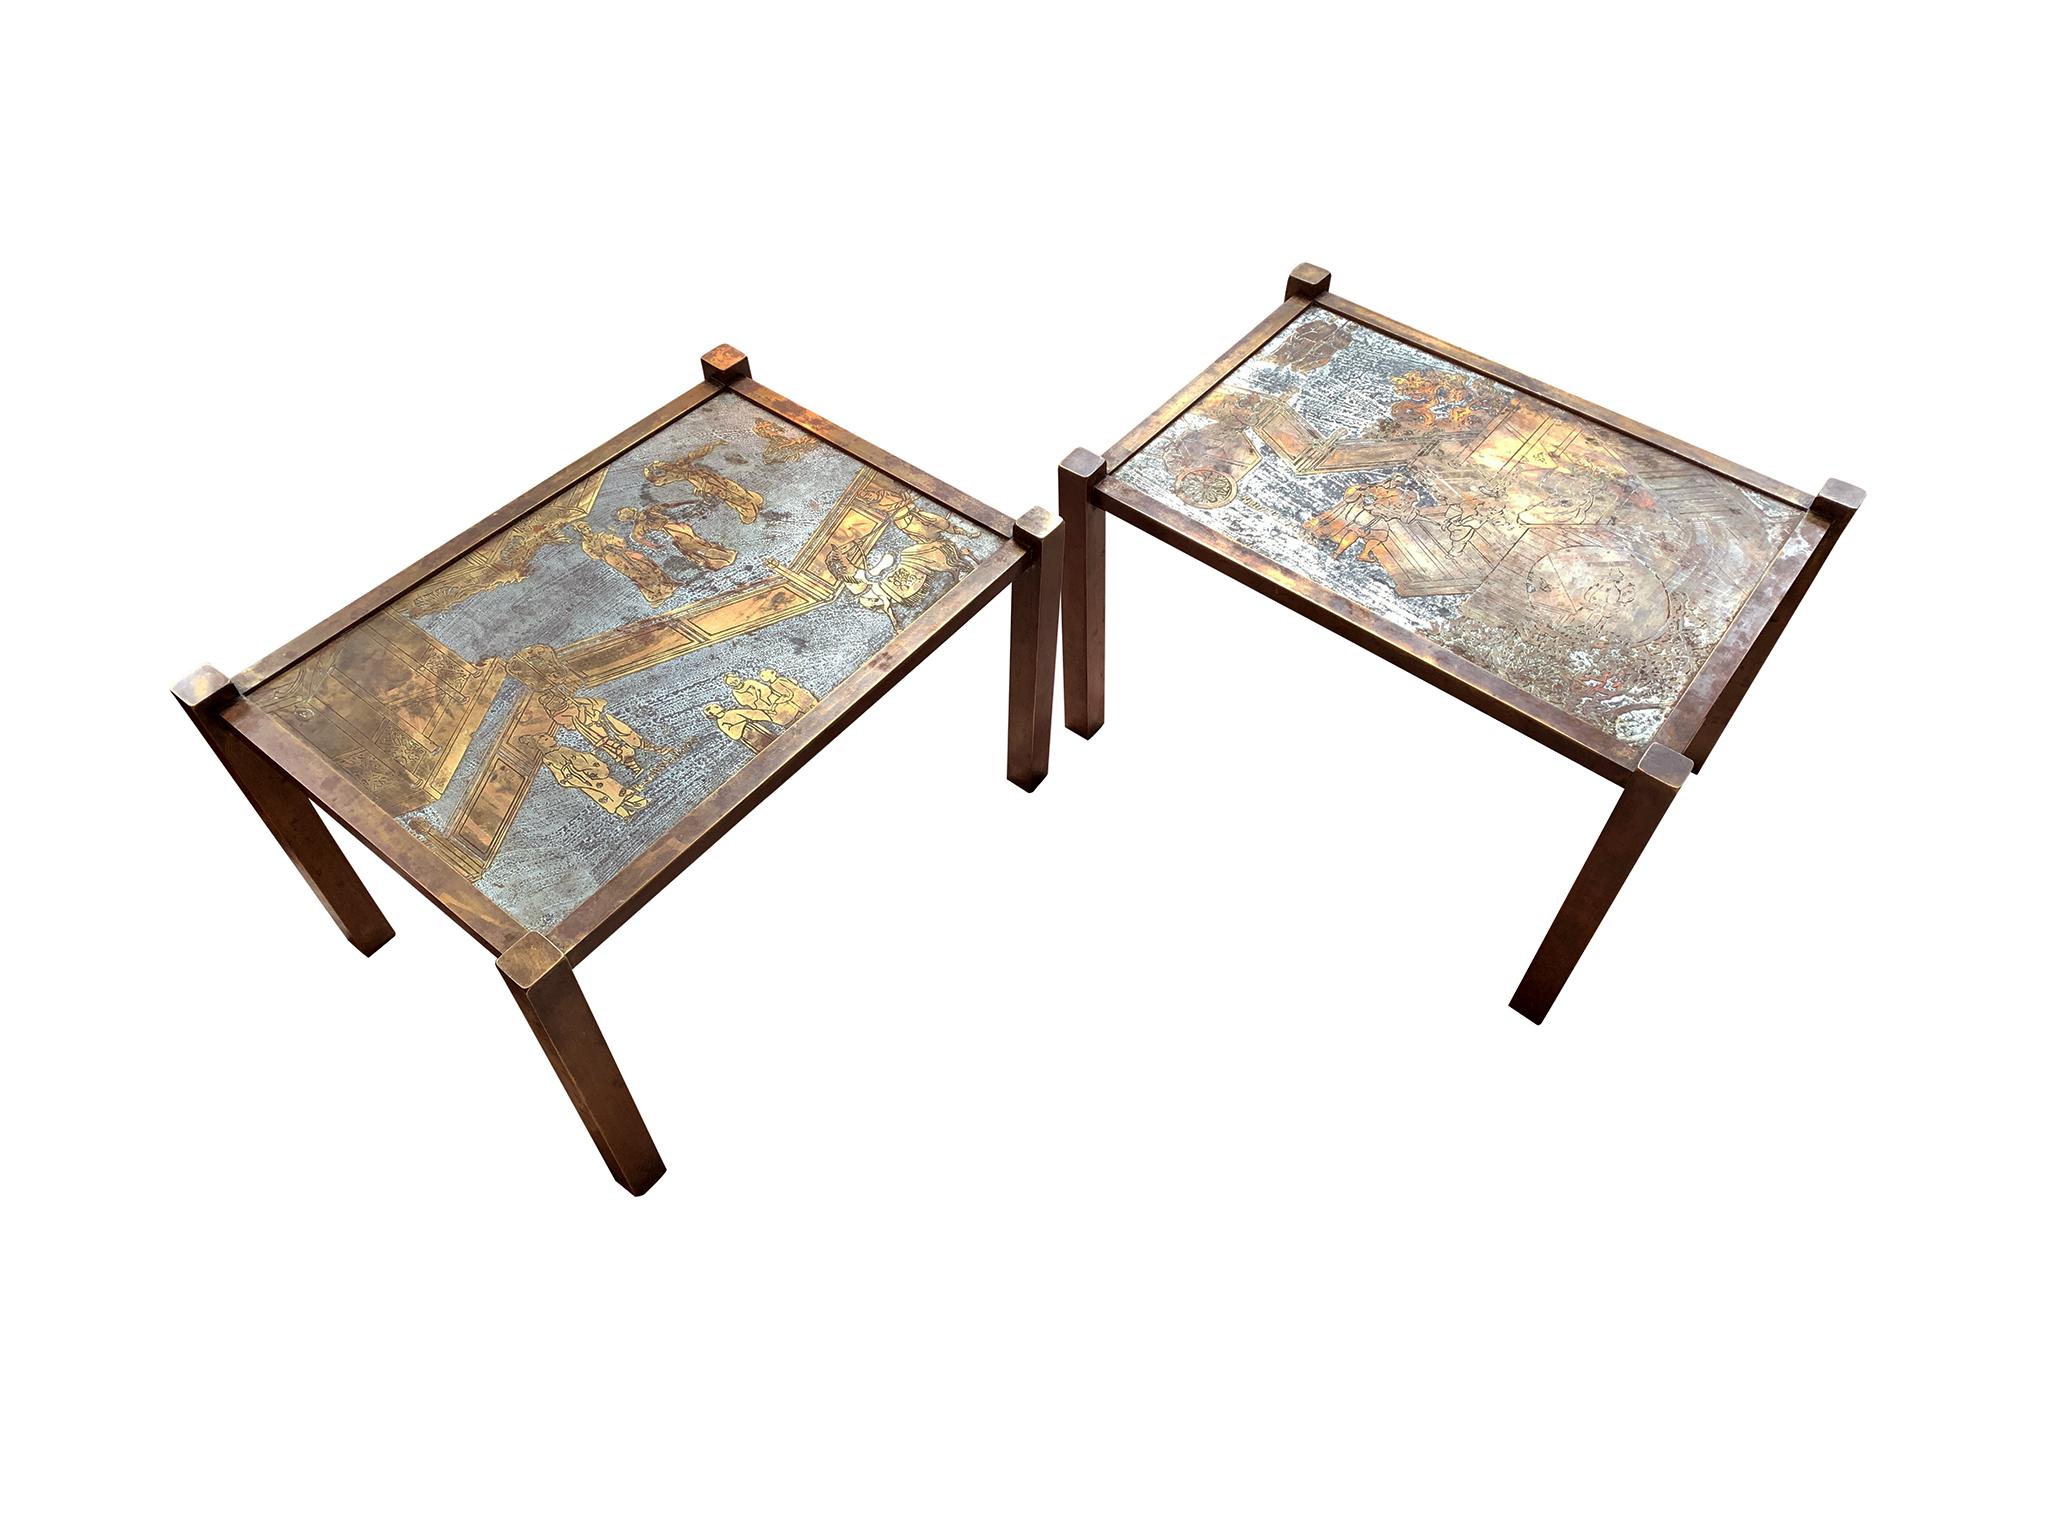 Philip and Kelvin LaVerne, a father-and-son team, created limited-edition furniture with their signature painterly touch, often rendering elaborate pastoral scenes through metalwork. This pair of rectangular bronze side tables was made in the